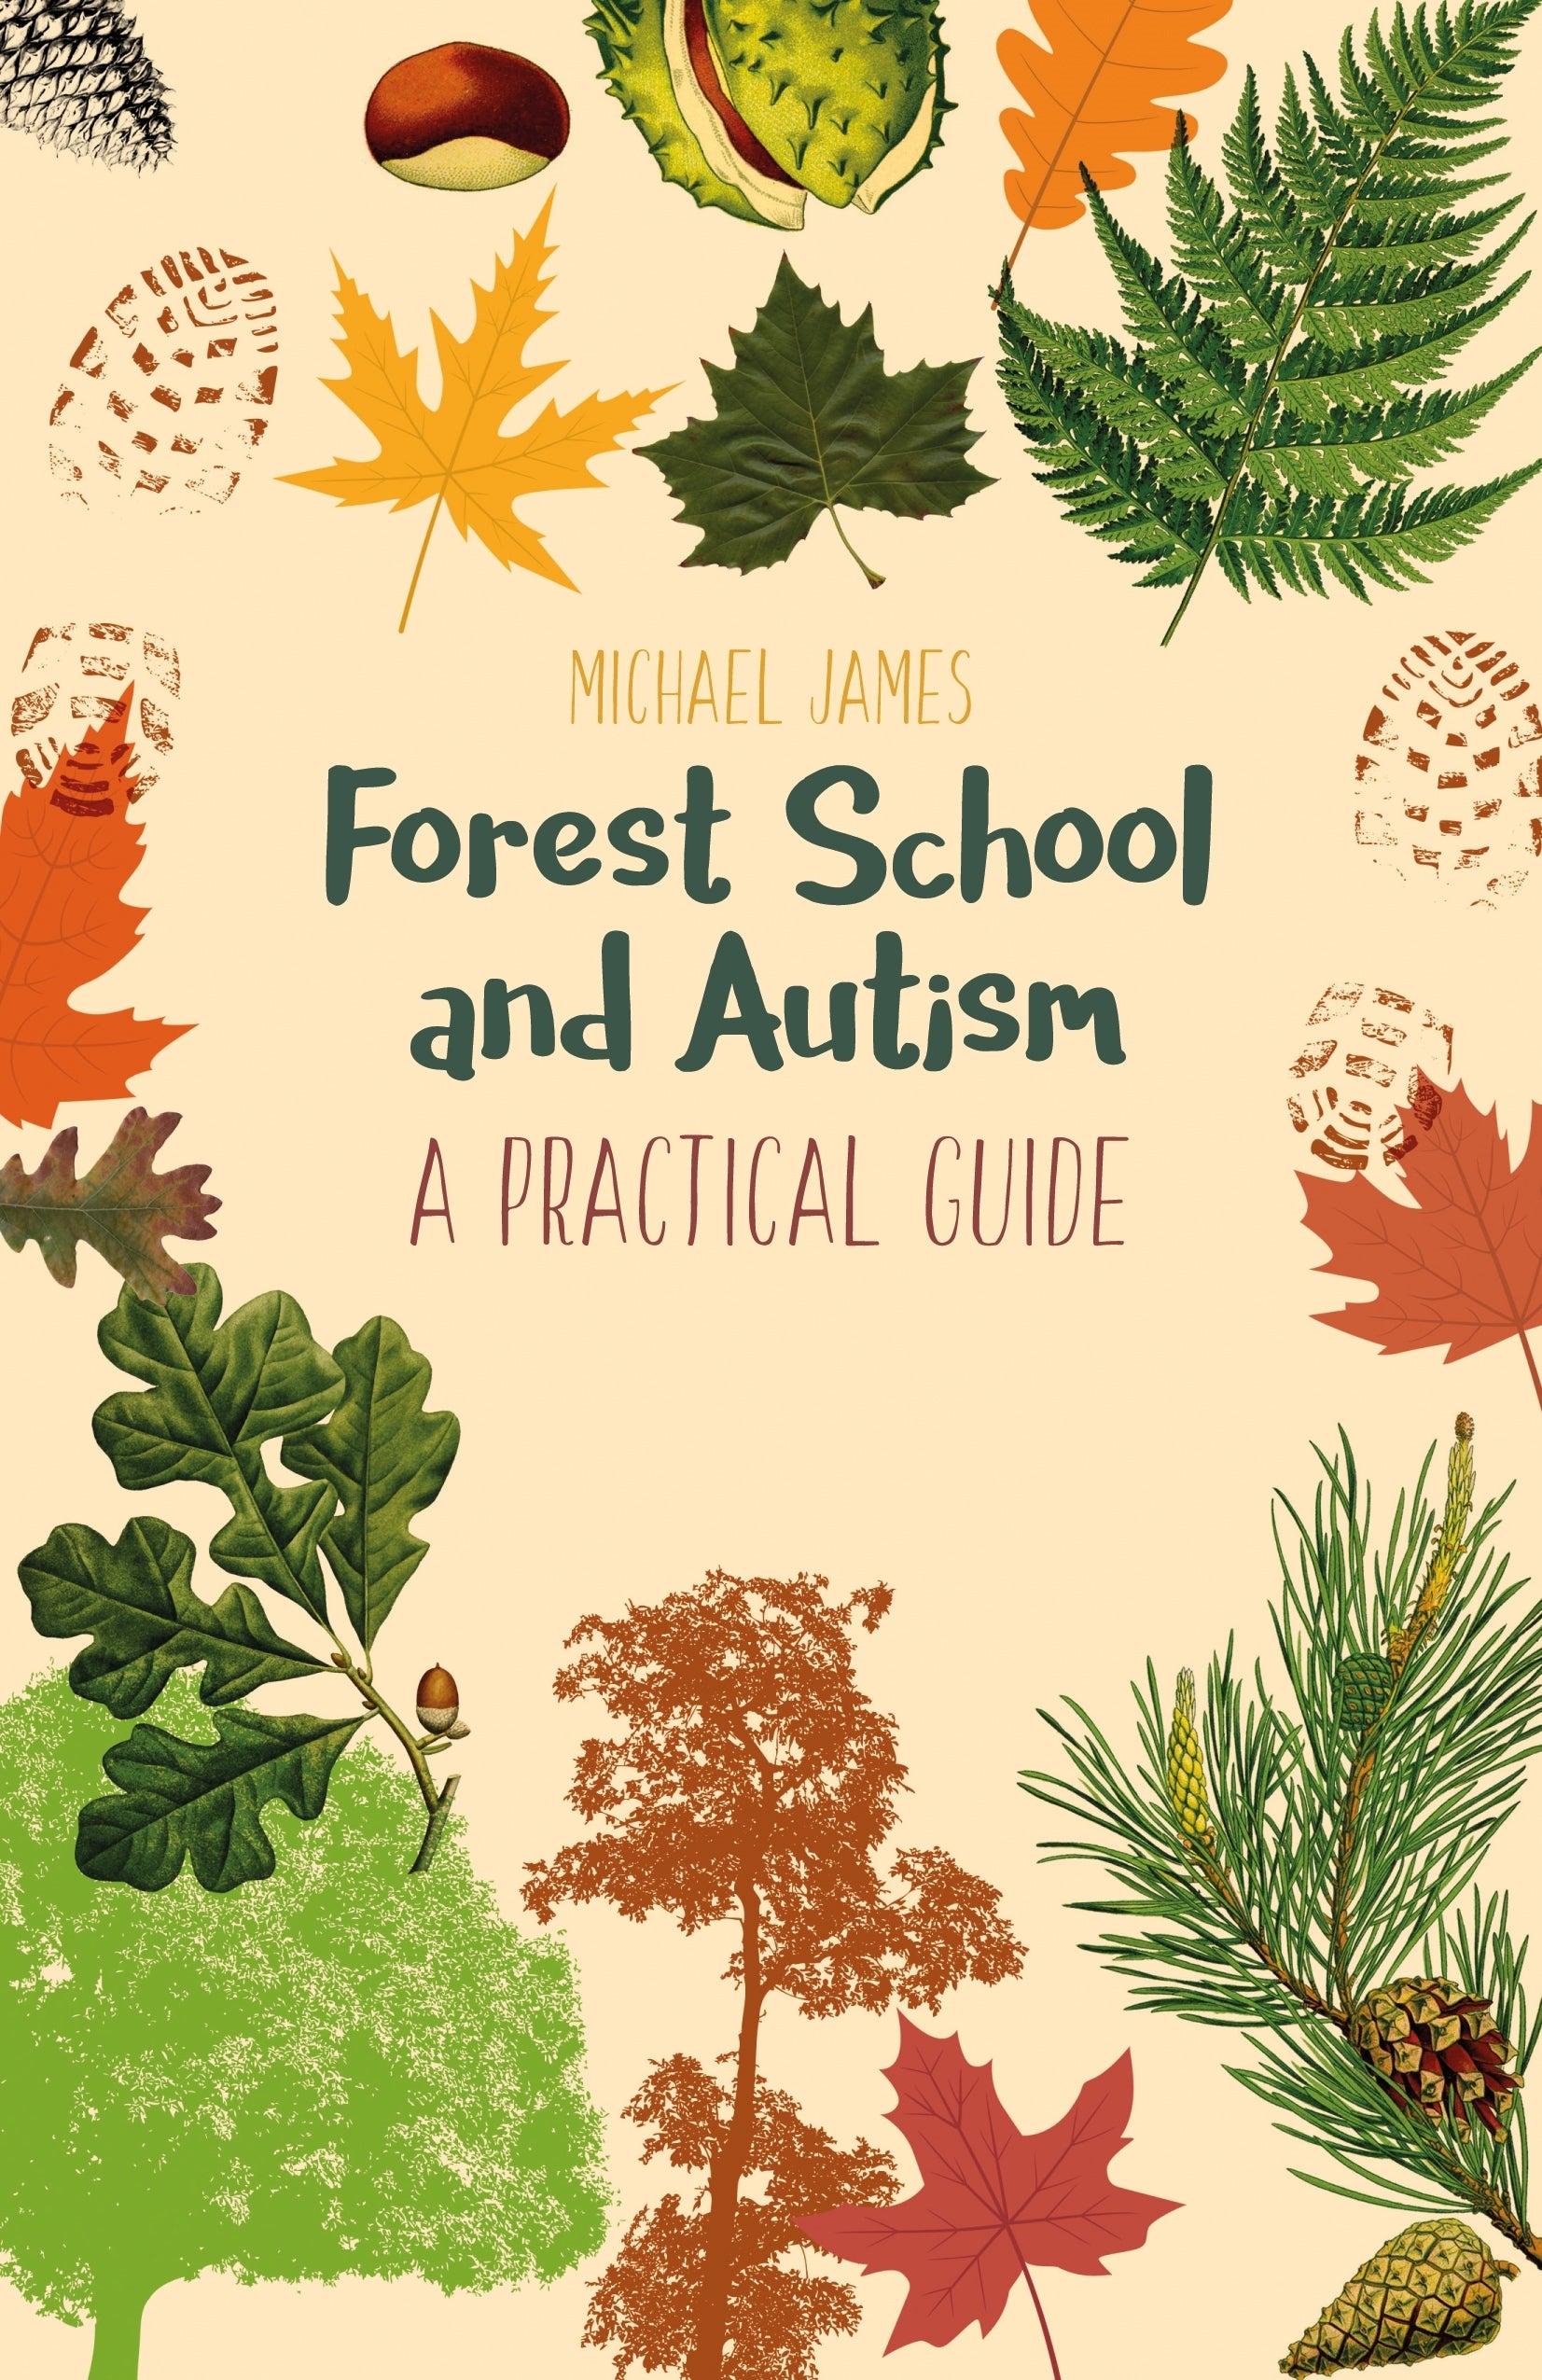 Forest School and Autism by Michael James